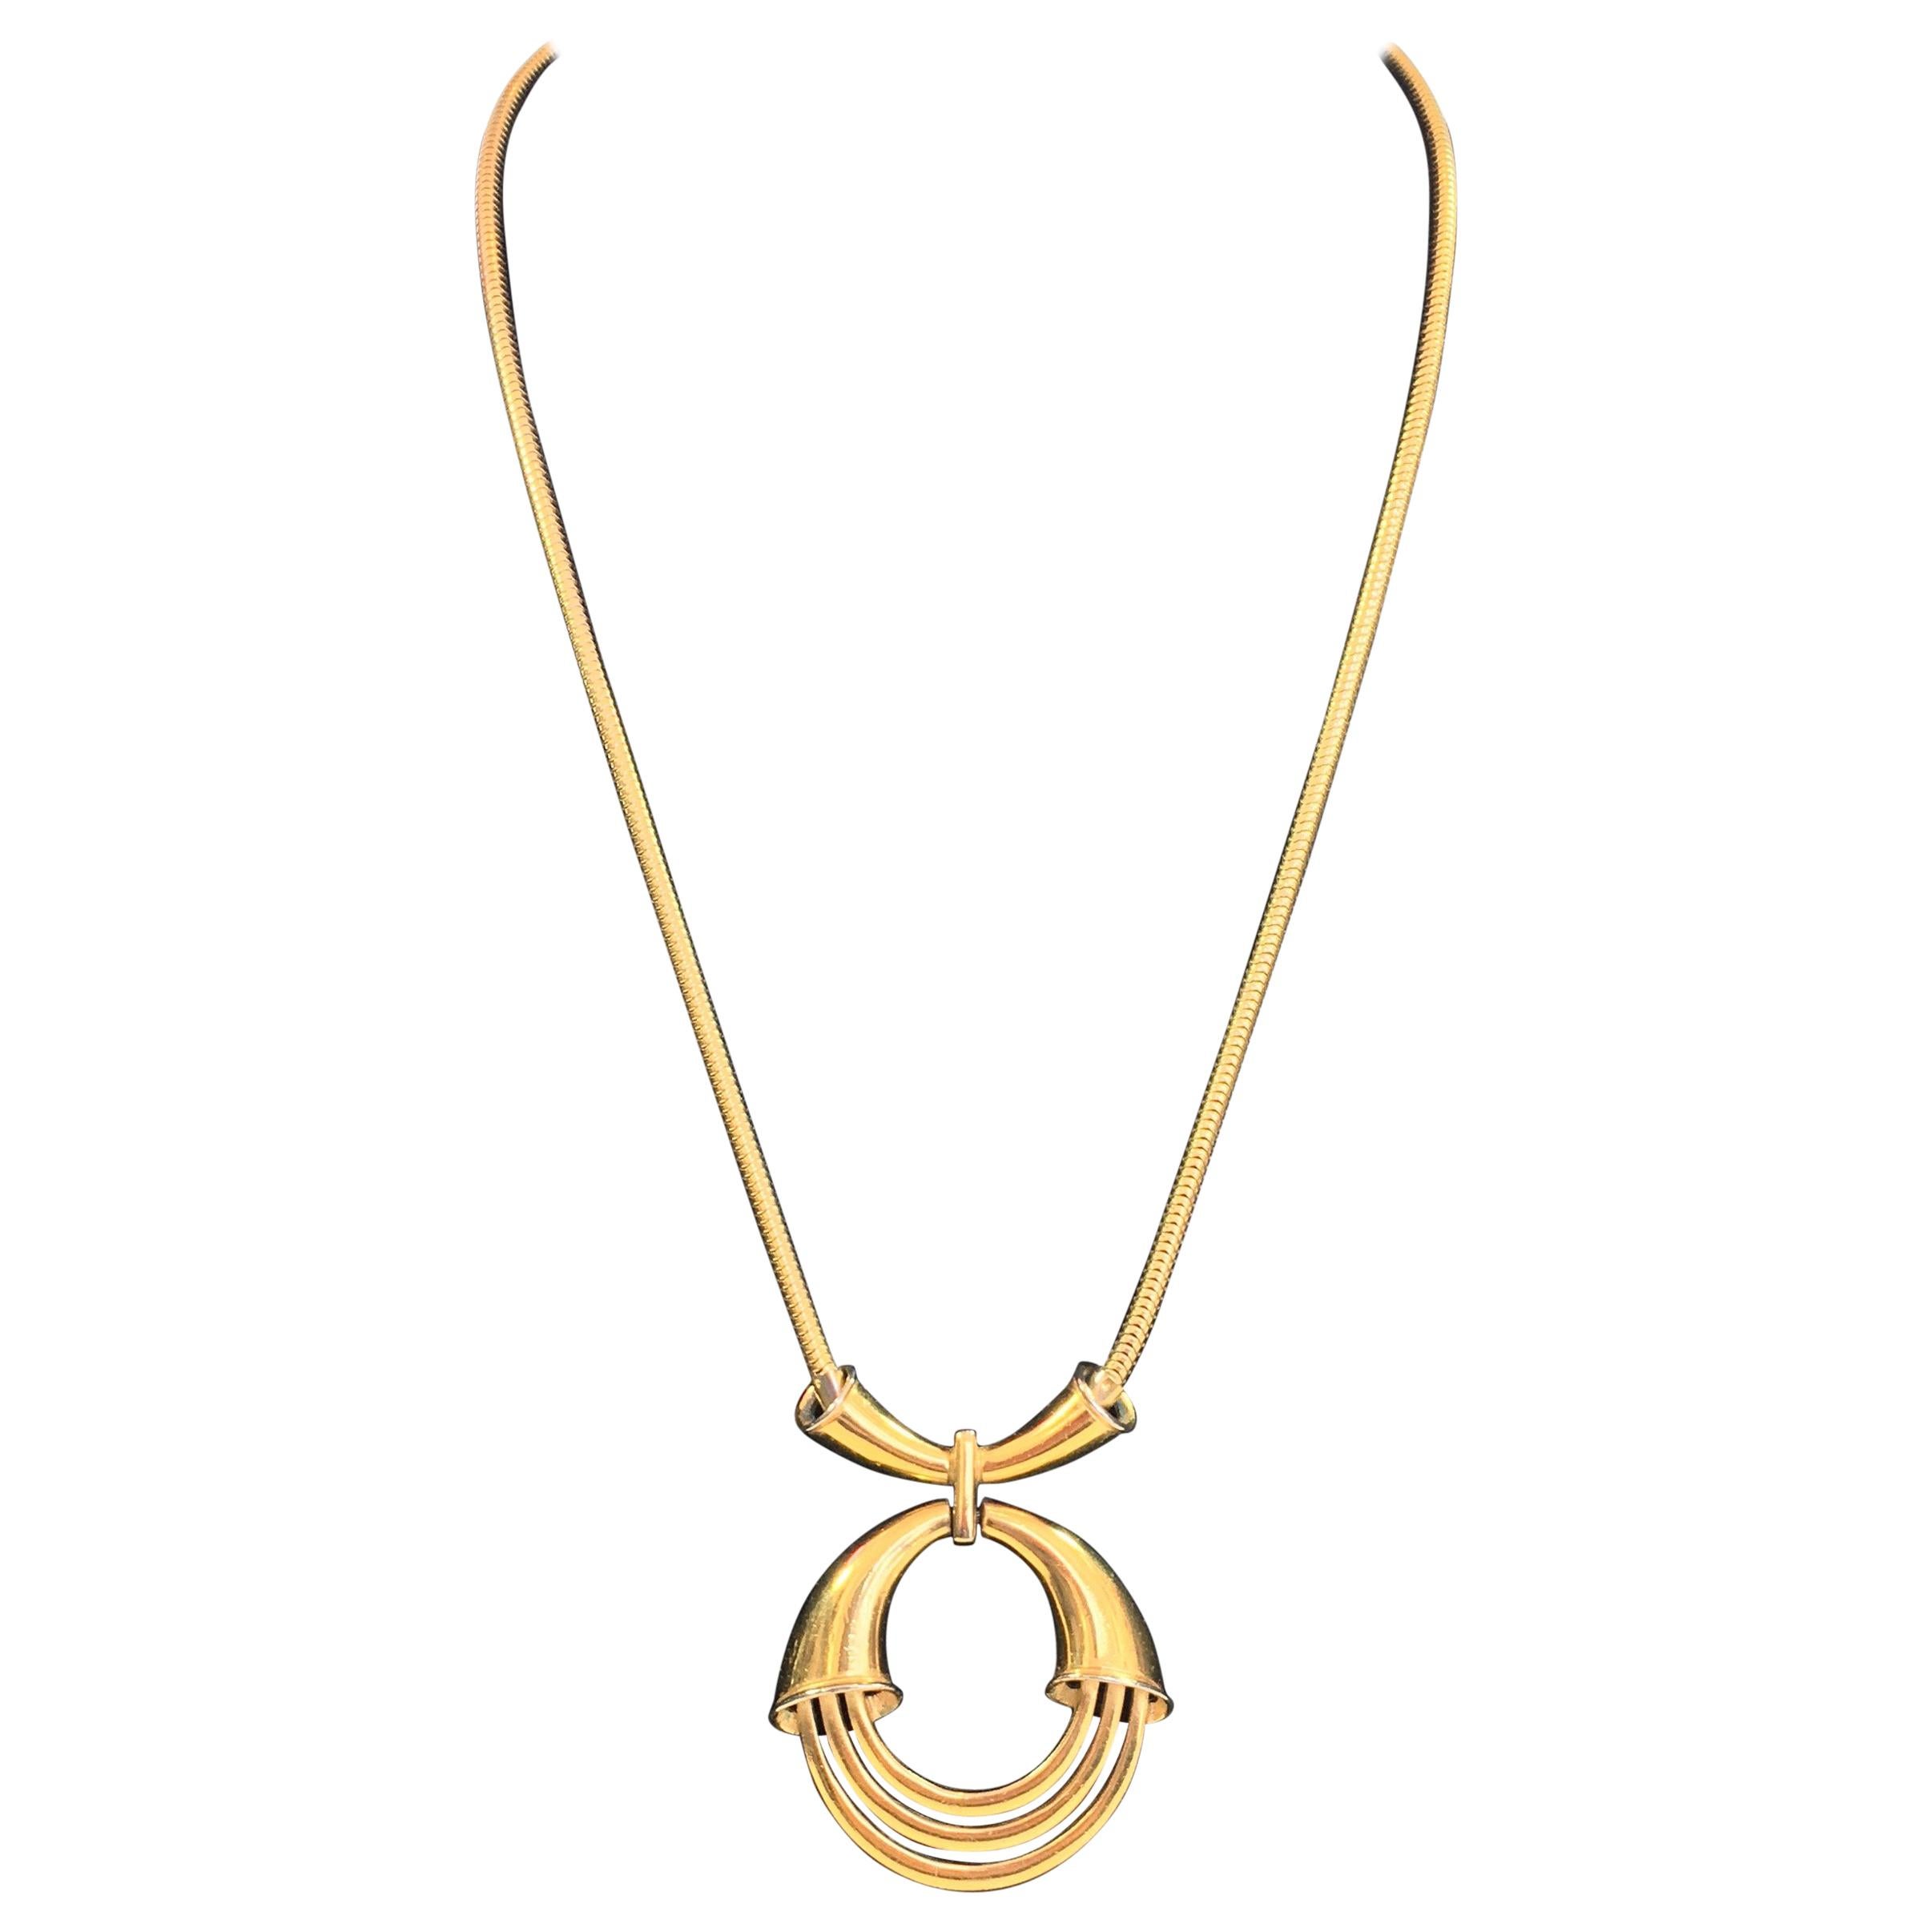 CHANEL CC Cross Necklace With Bell  Chanel jewelry, Fashion jewelry  necklaces, Fashion jewelry